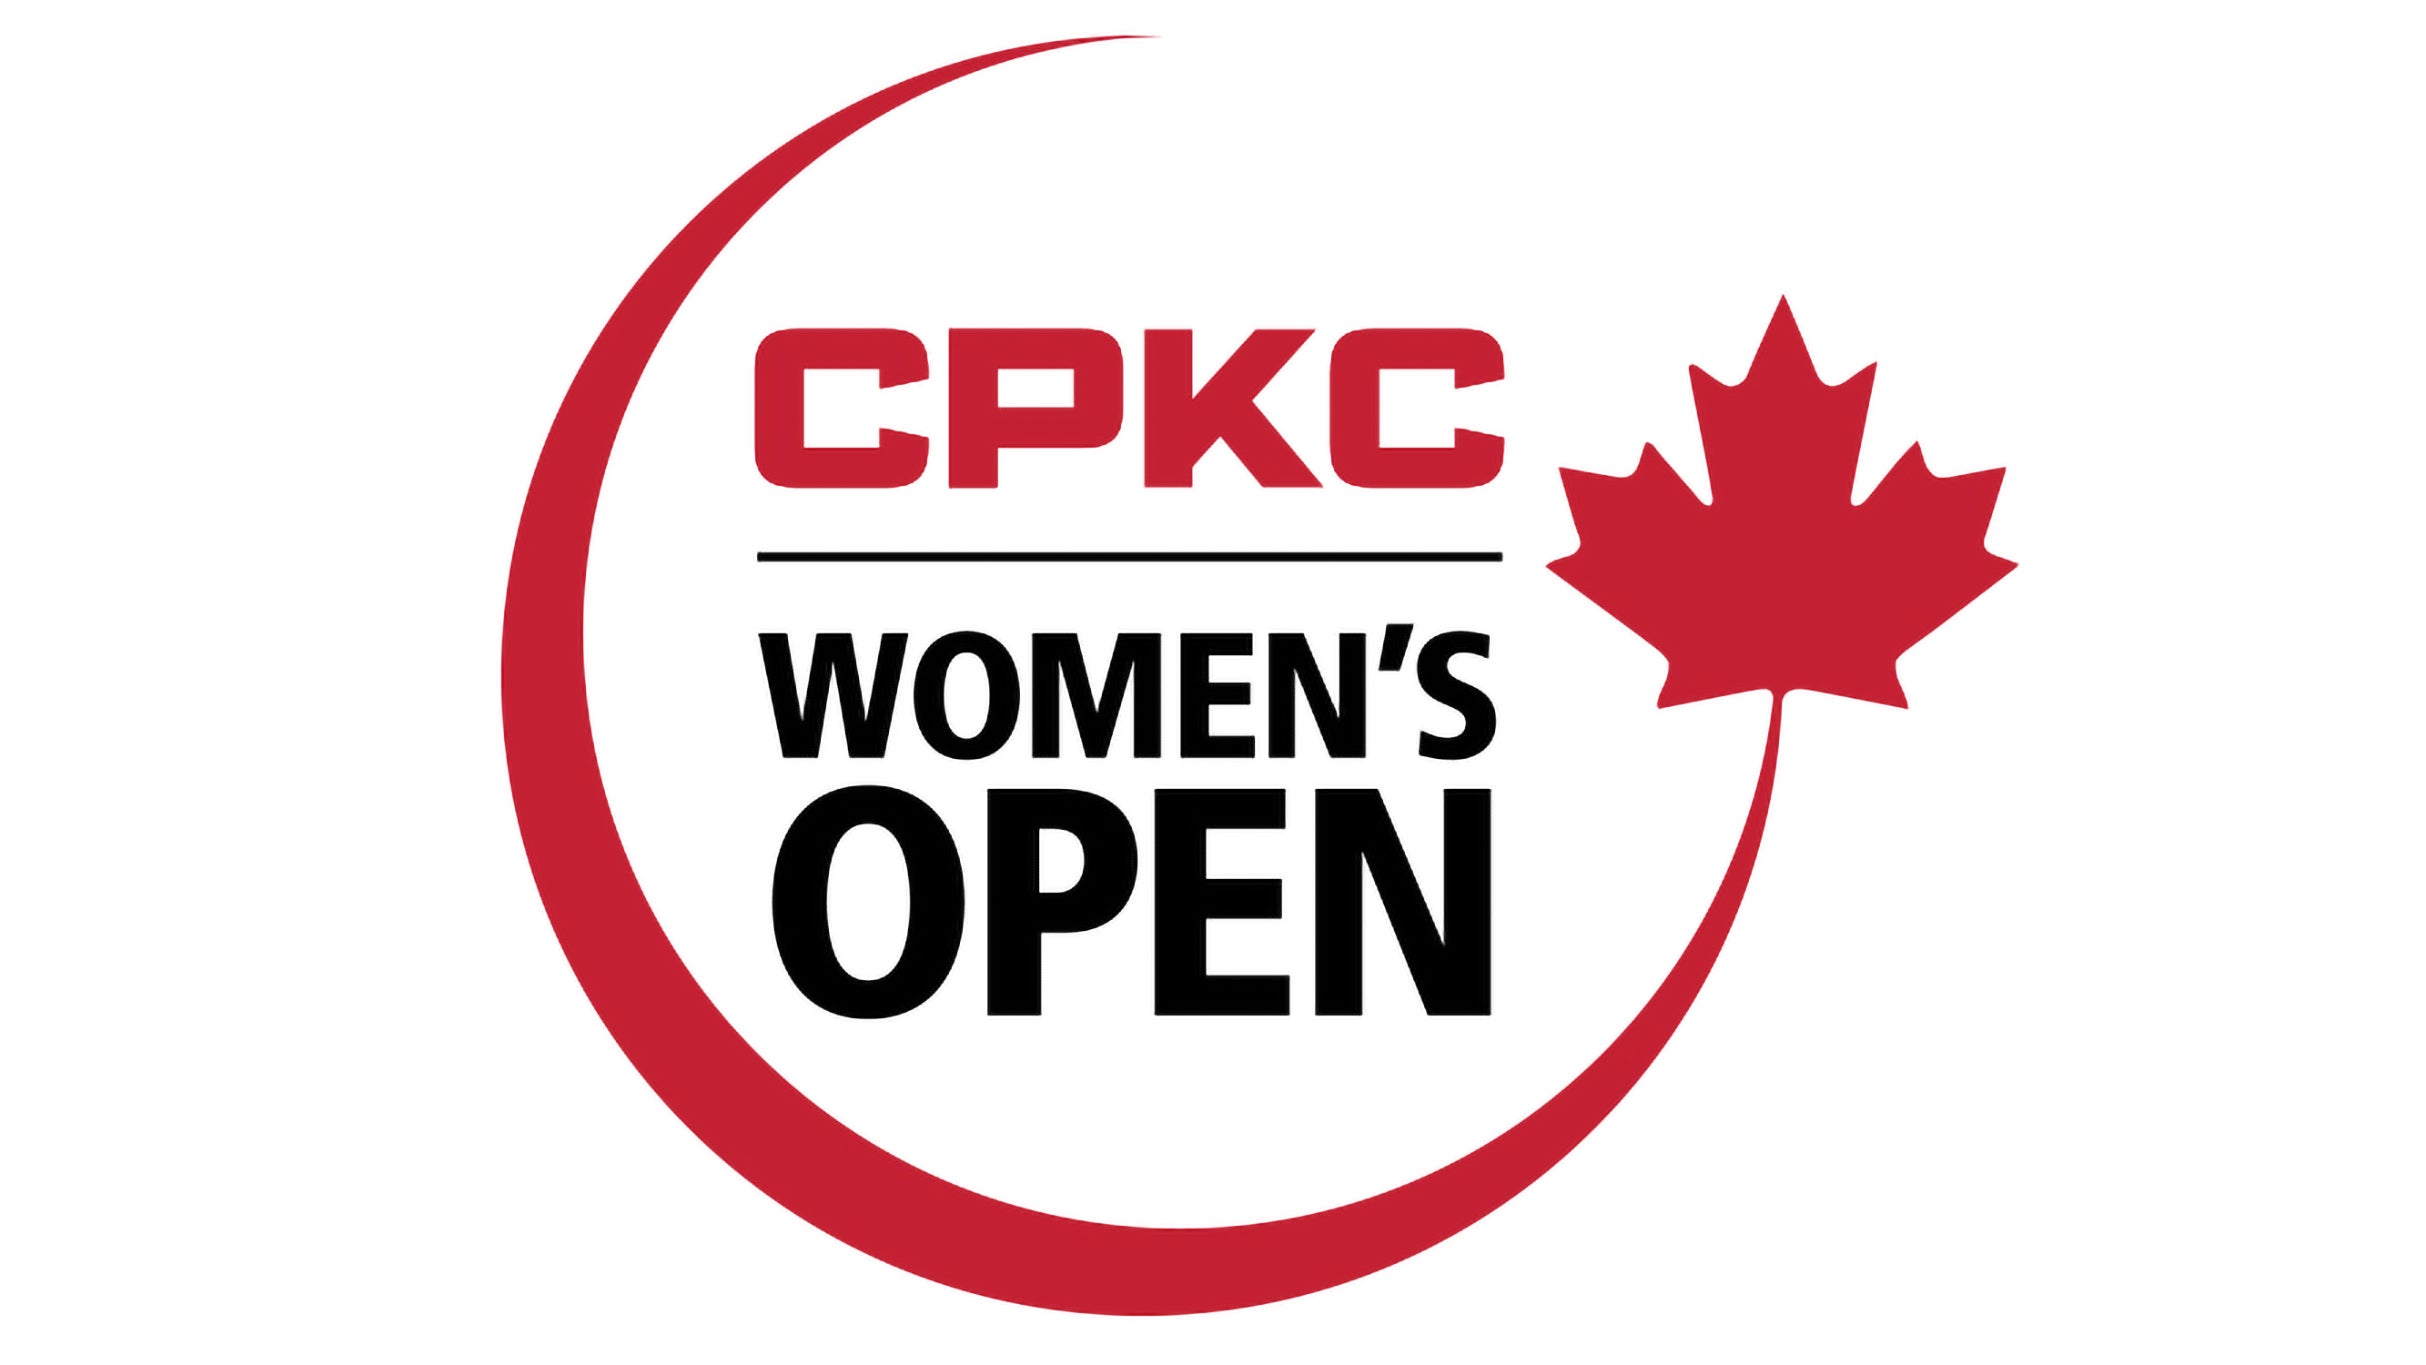 CPKC Women's Open - Any One Day Grounds Admission in Vancouver promo photo for Golf Canada Partner presale offer code